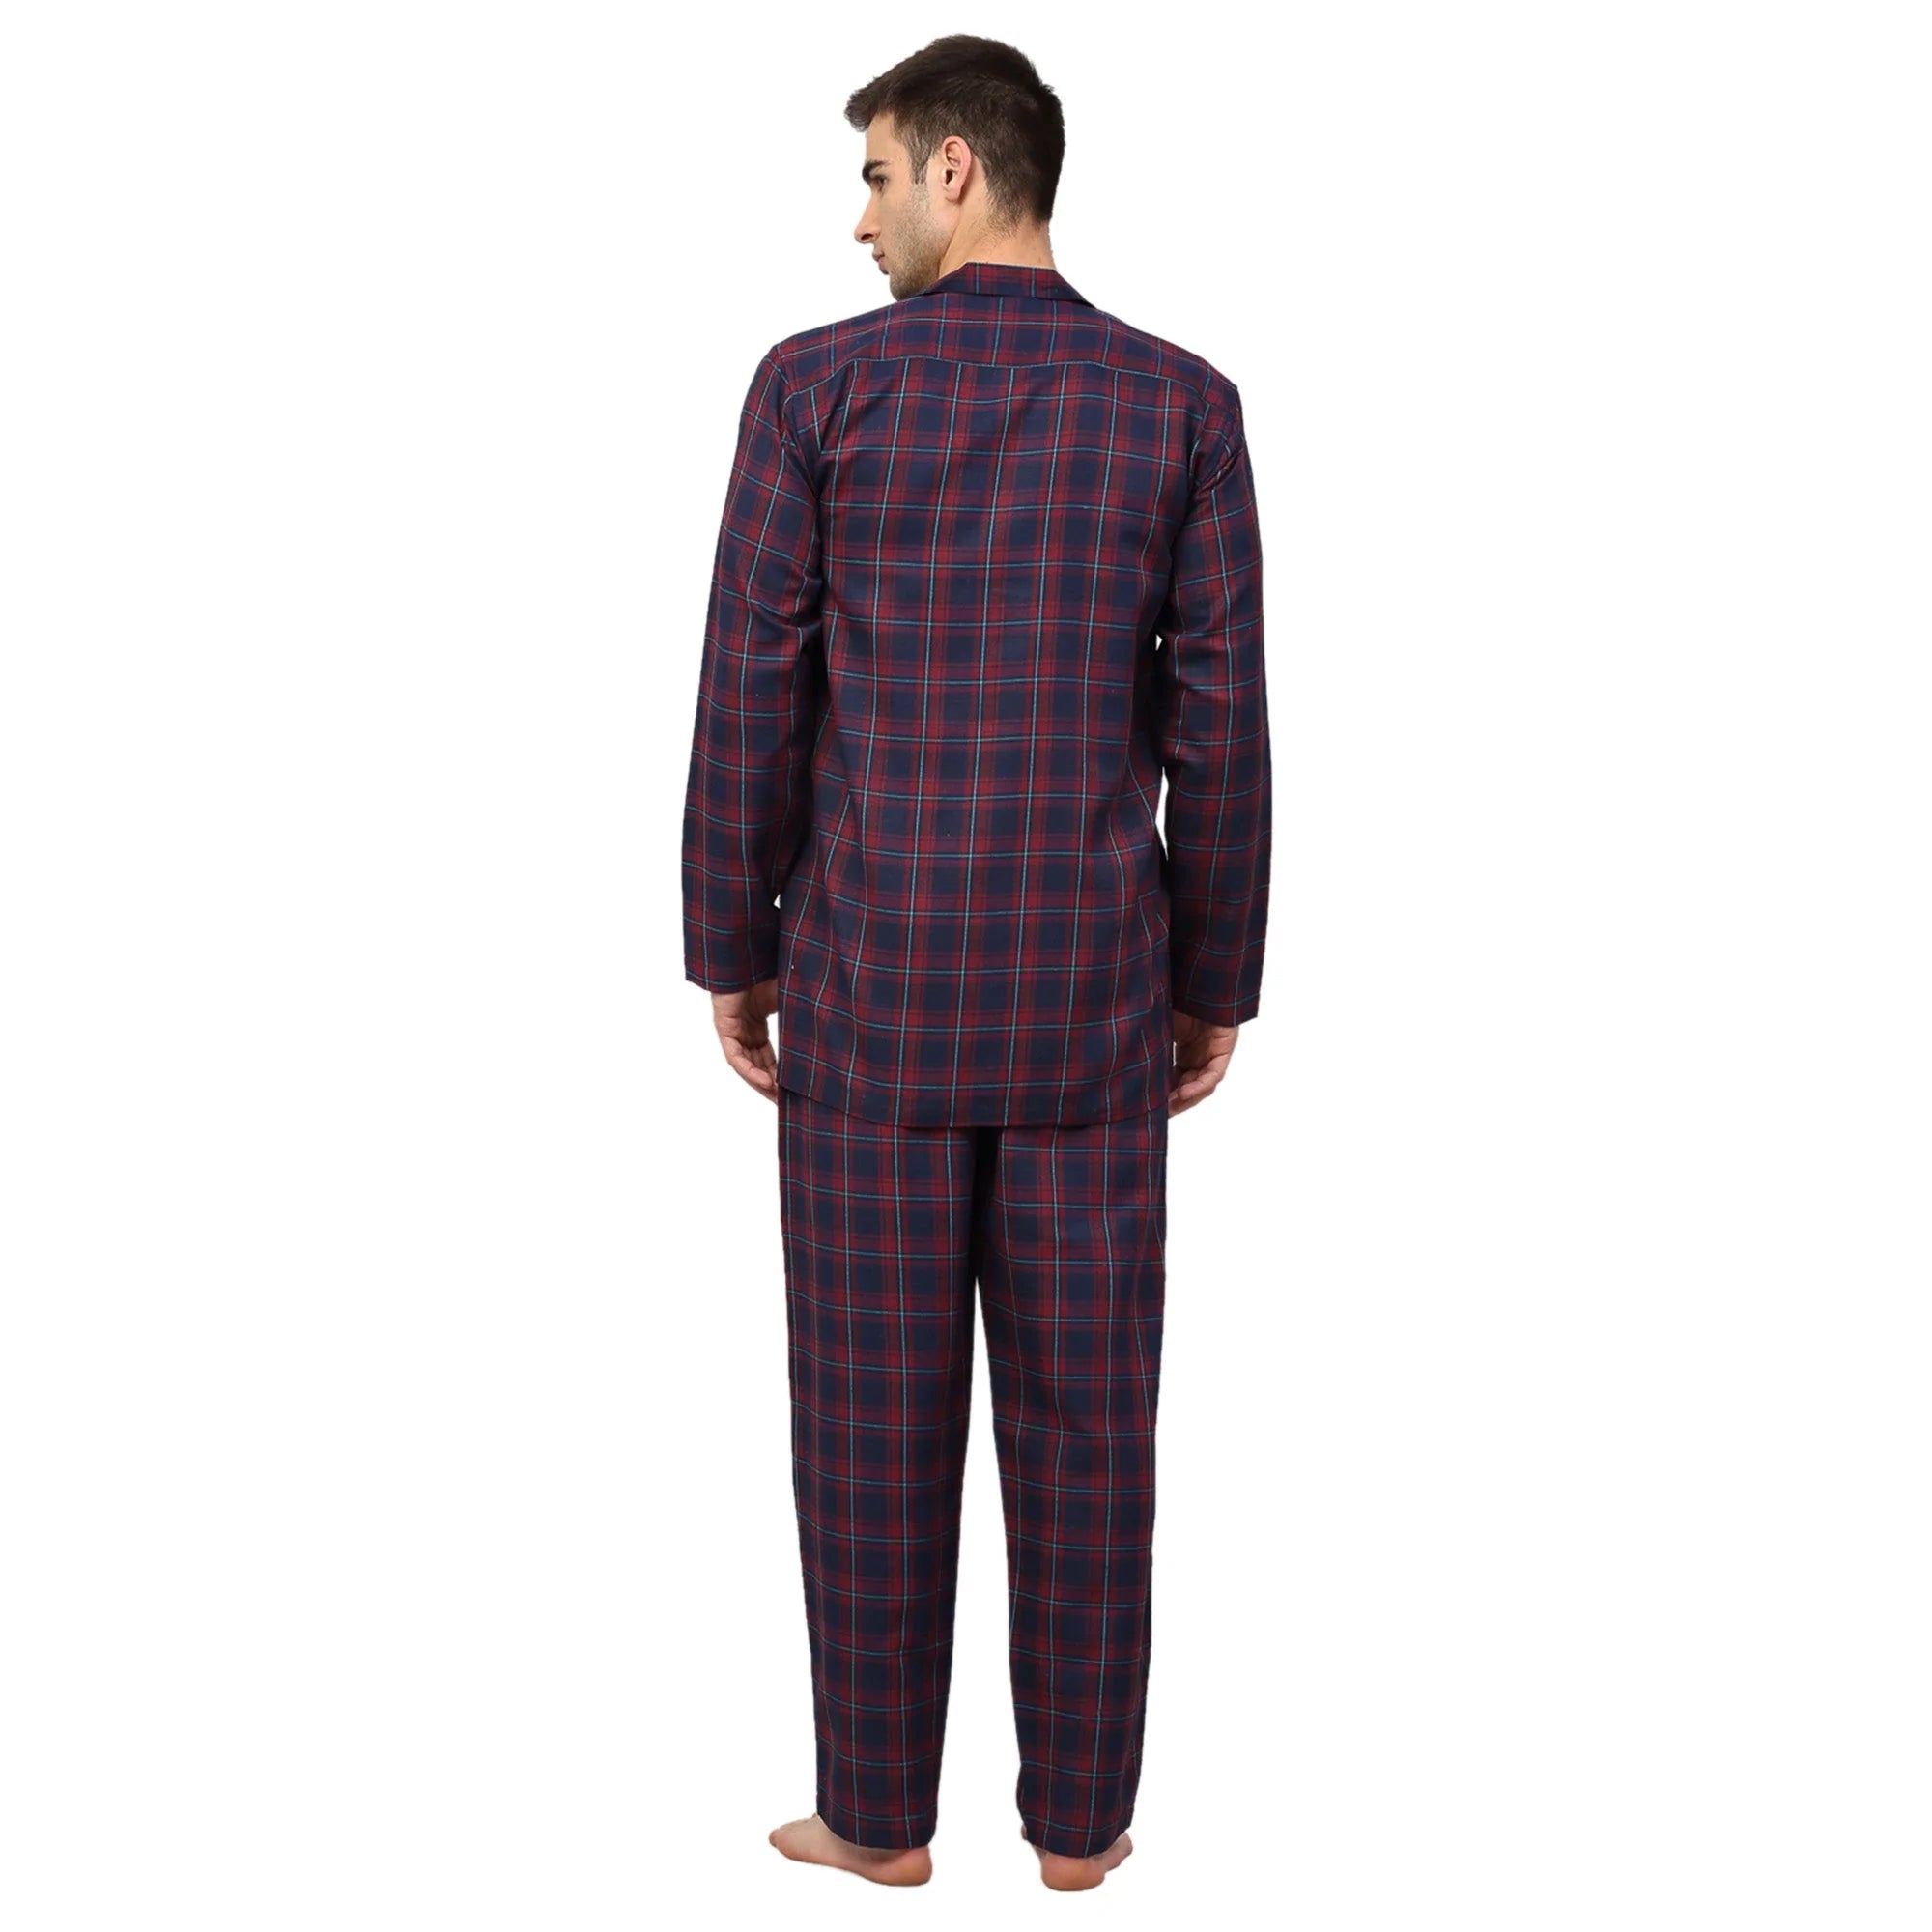 Jainish Men's Blue Checked Night Suits ( GNS 001Blue-Red )